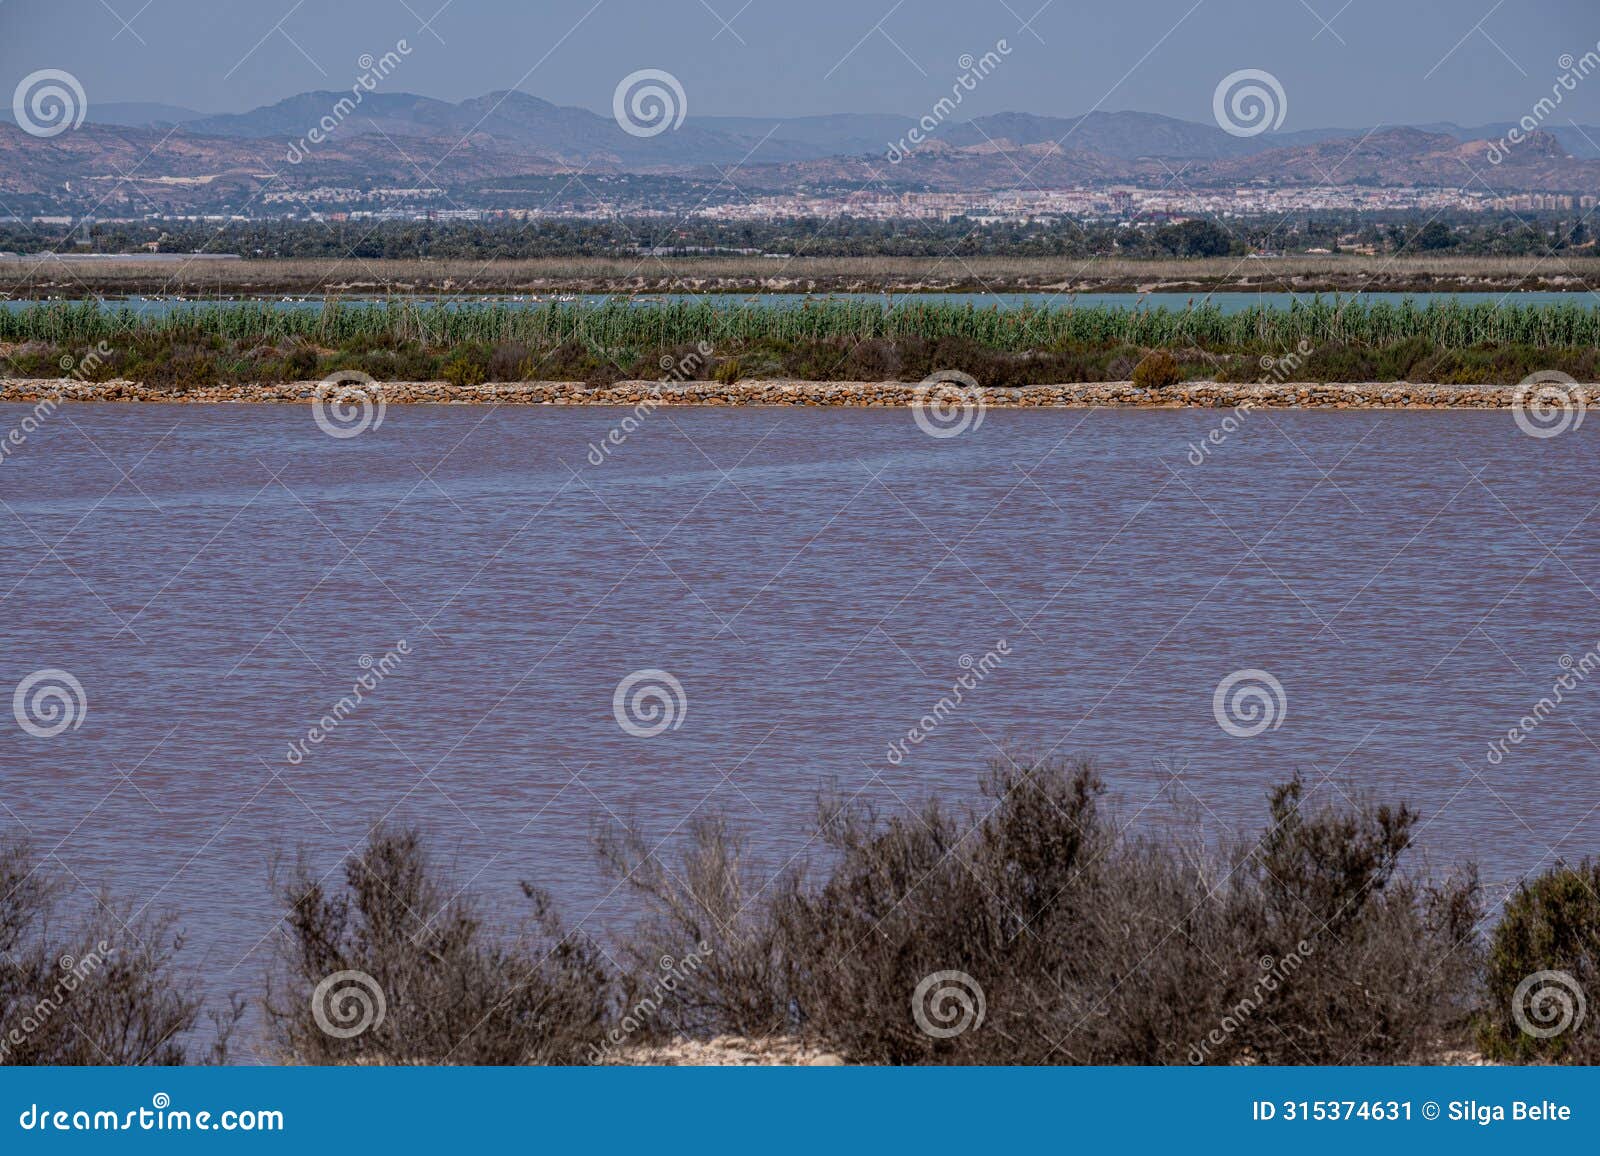 a salt lake with briny pink waters, foregrounded by shrubs, with distant mountains and clear skies.